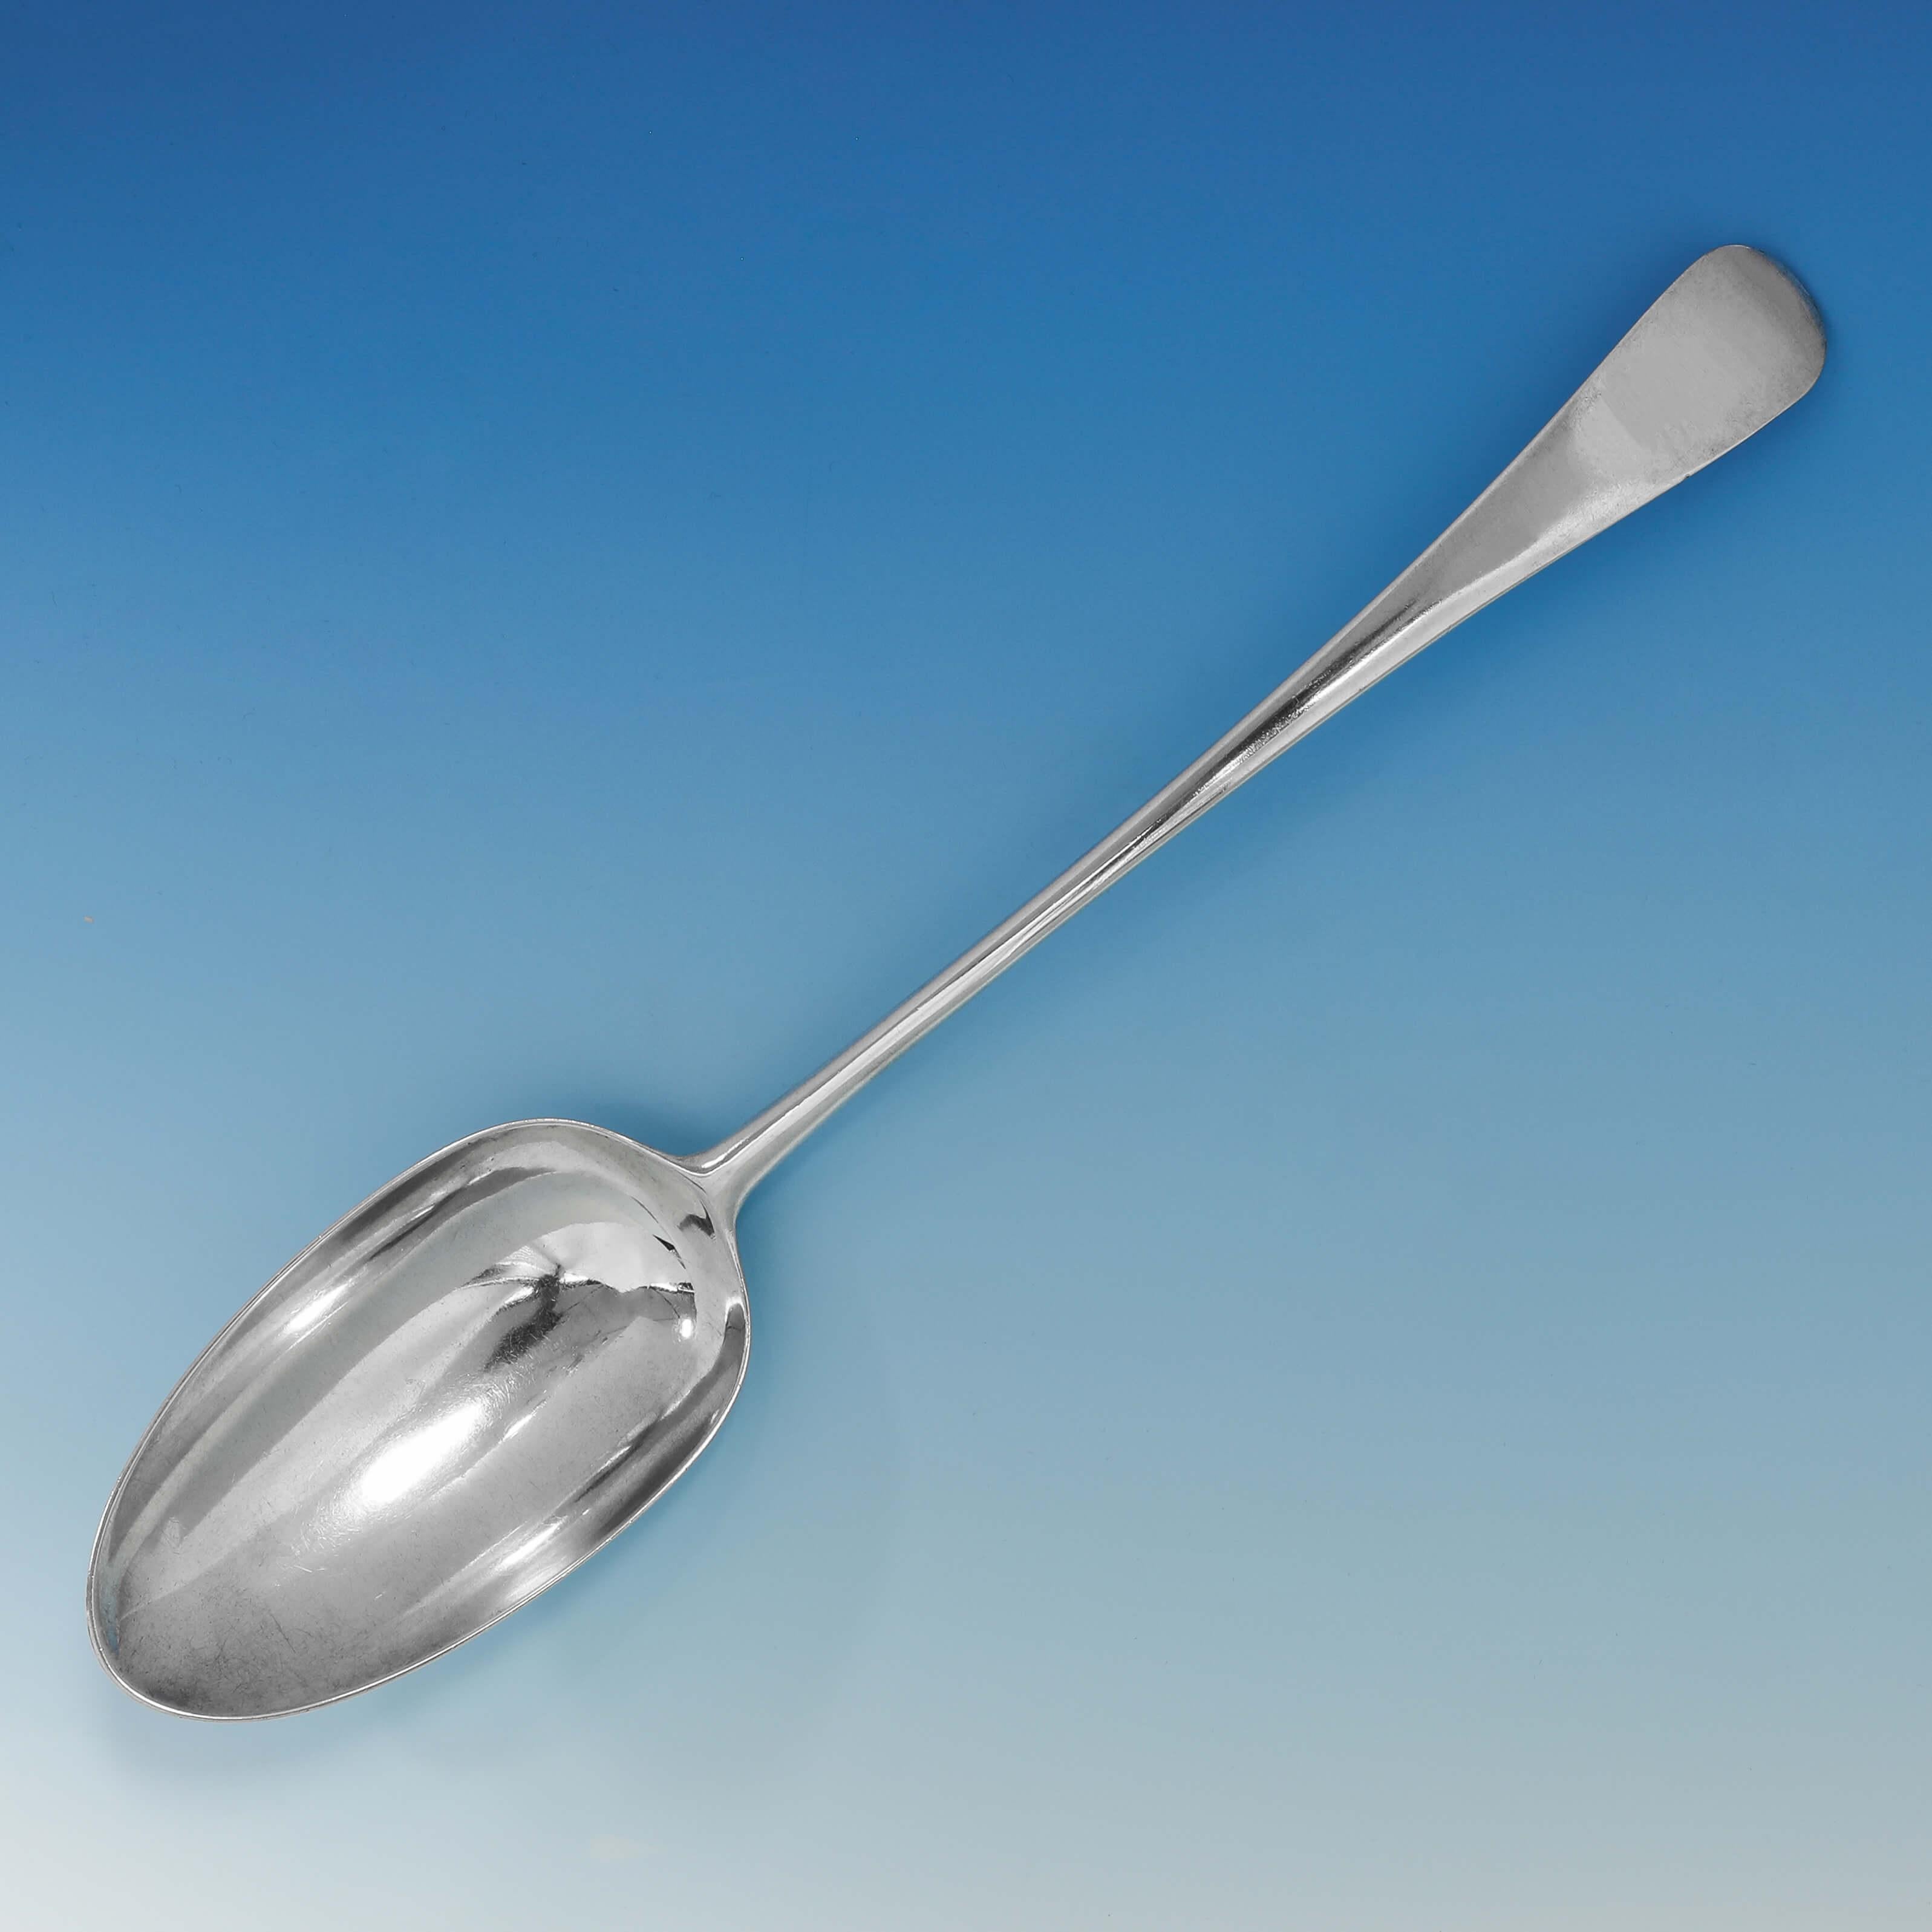 Hallmarked in London in 1757 by Henry Bailey, this very handsome, George II, antique sterling silver basting spoon, is in 'Old English' pattern, and has an unusual and very large bowl. The basting spoon measures 14